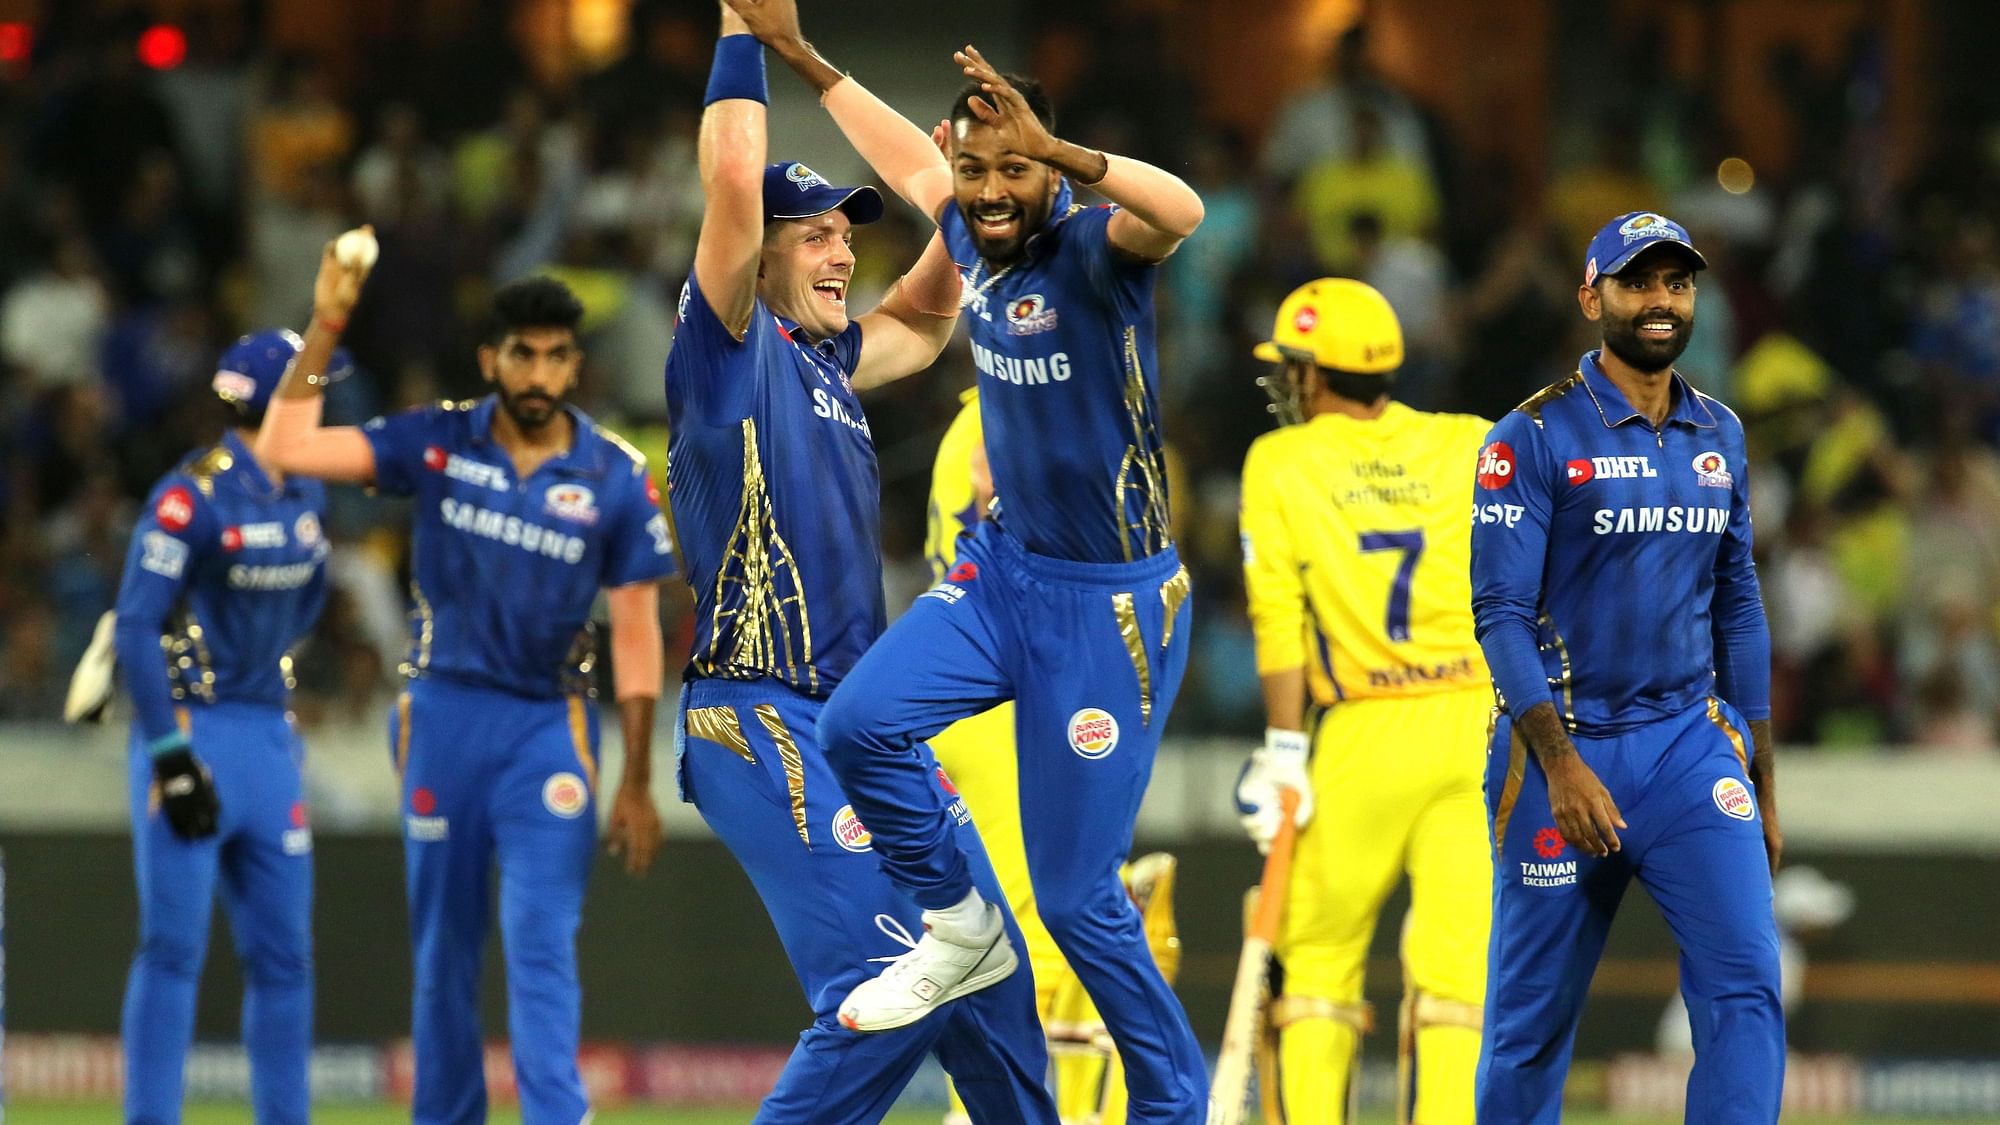 Mumbai Indians players celebrate the run out that sent MS Dhoni back to the dressing room on 2.